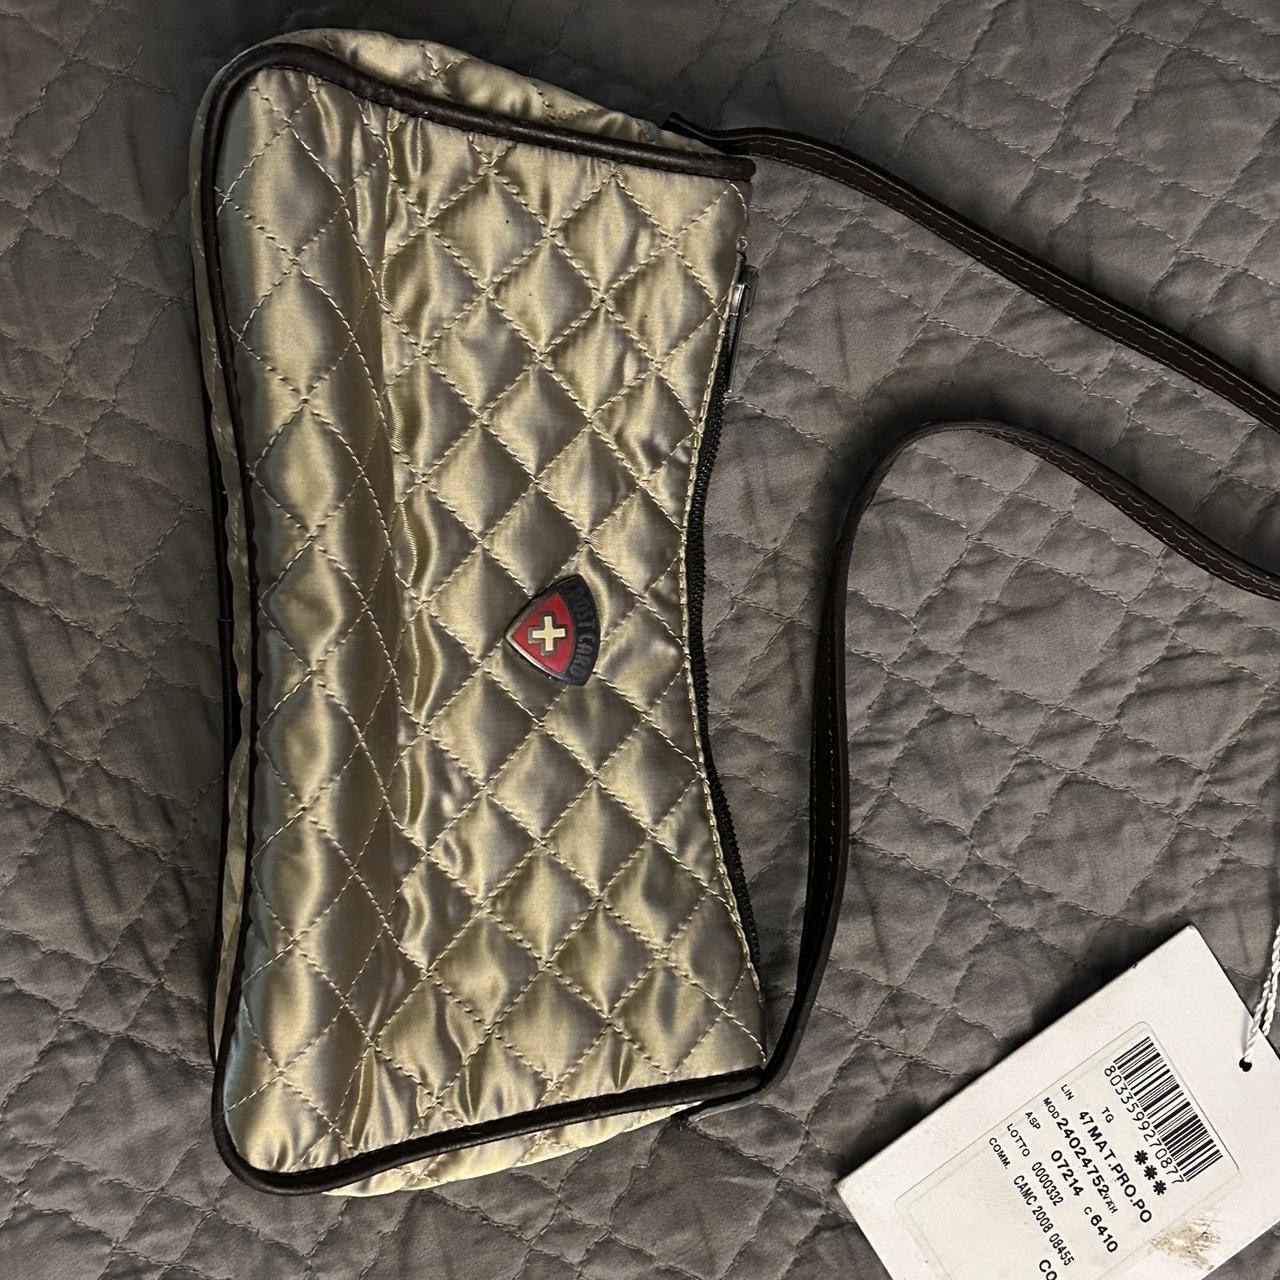 Louis Vuitton clutch that can be used as a small - Depop